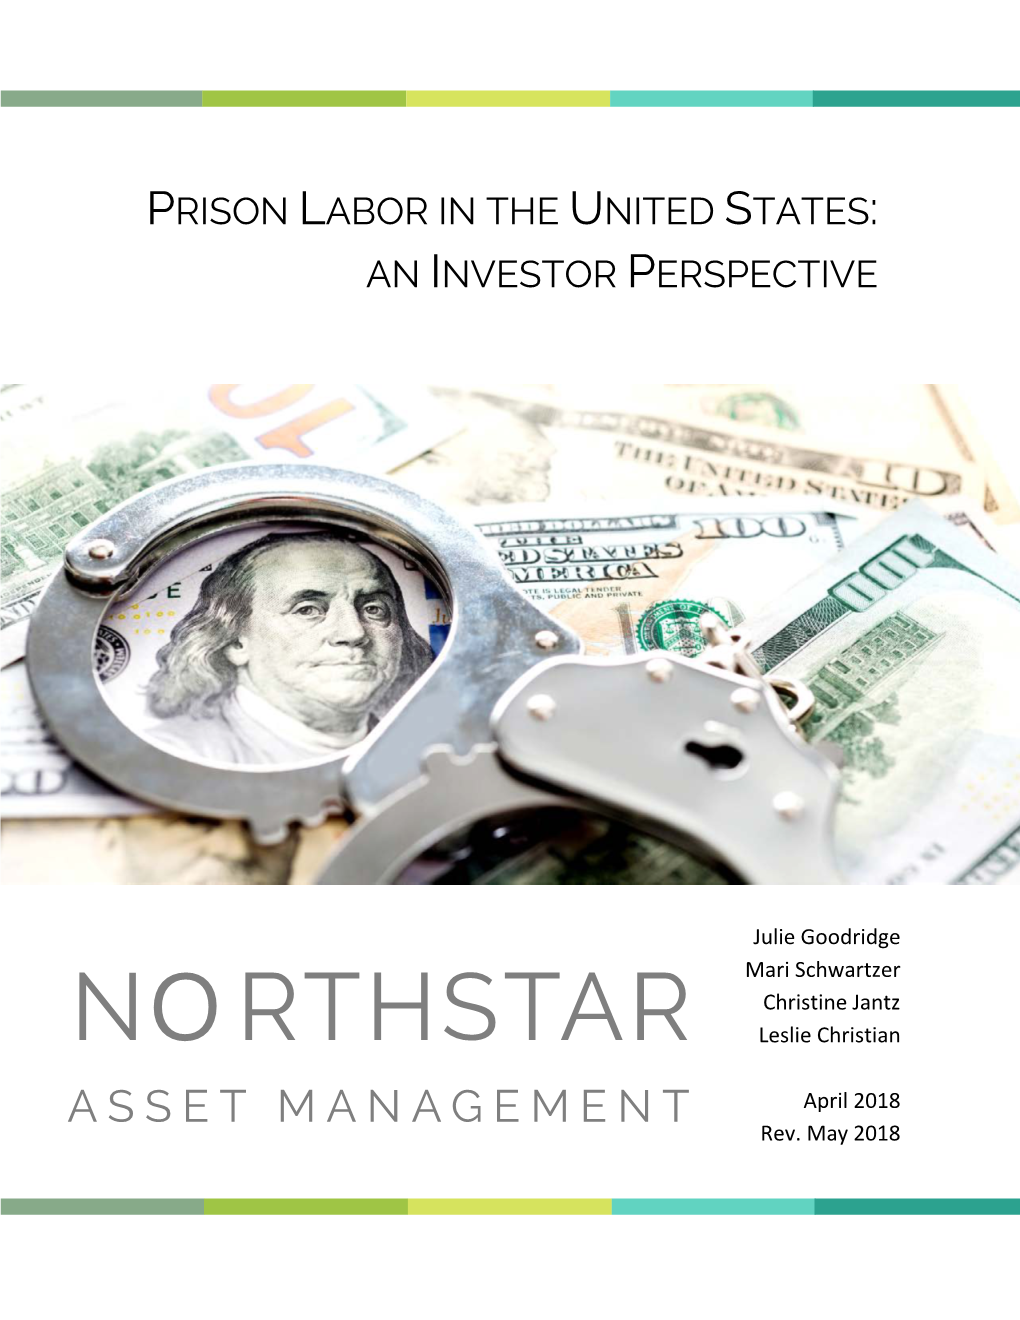 Prison Labor in the United States: an Investor Perspective